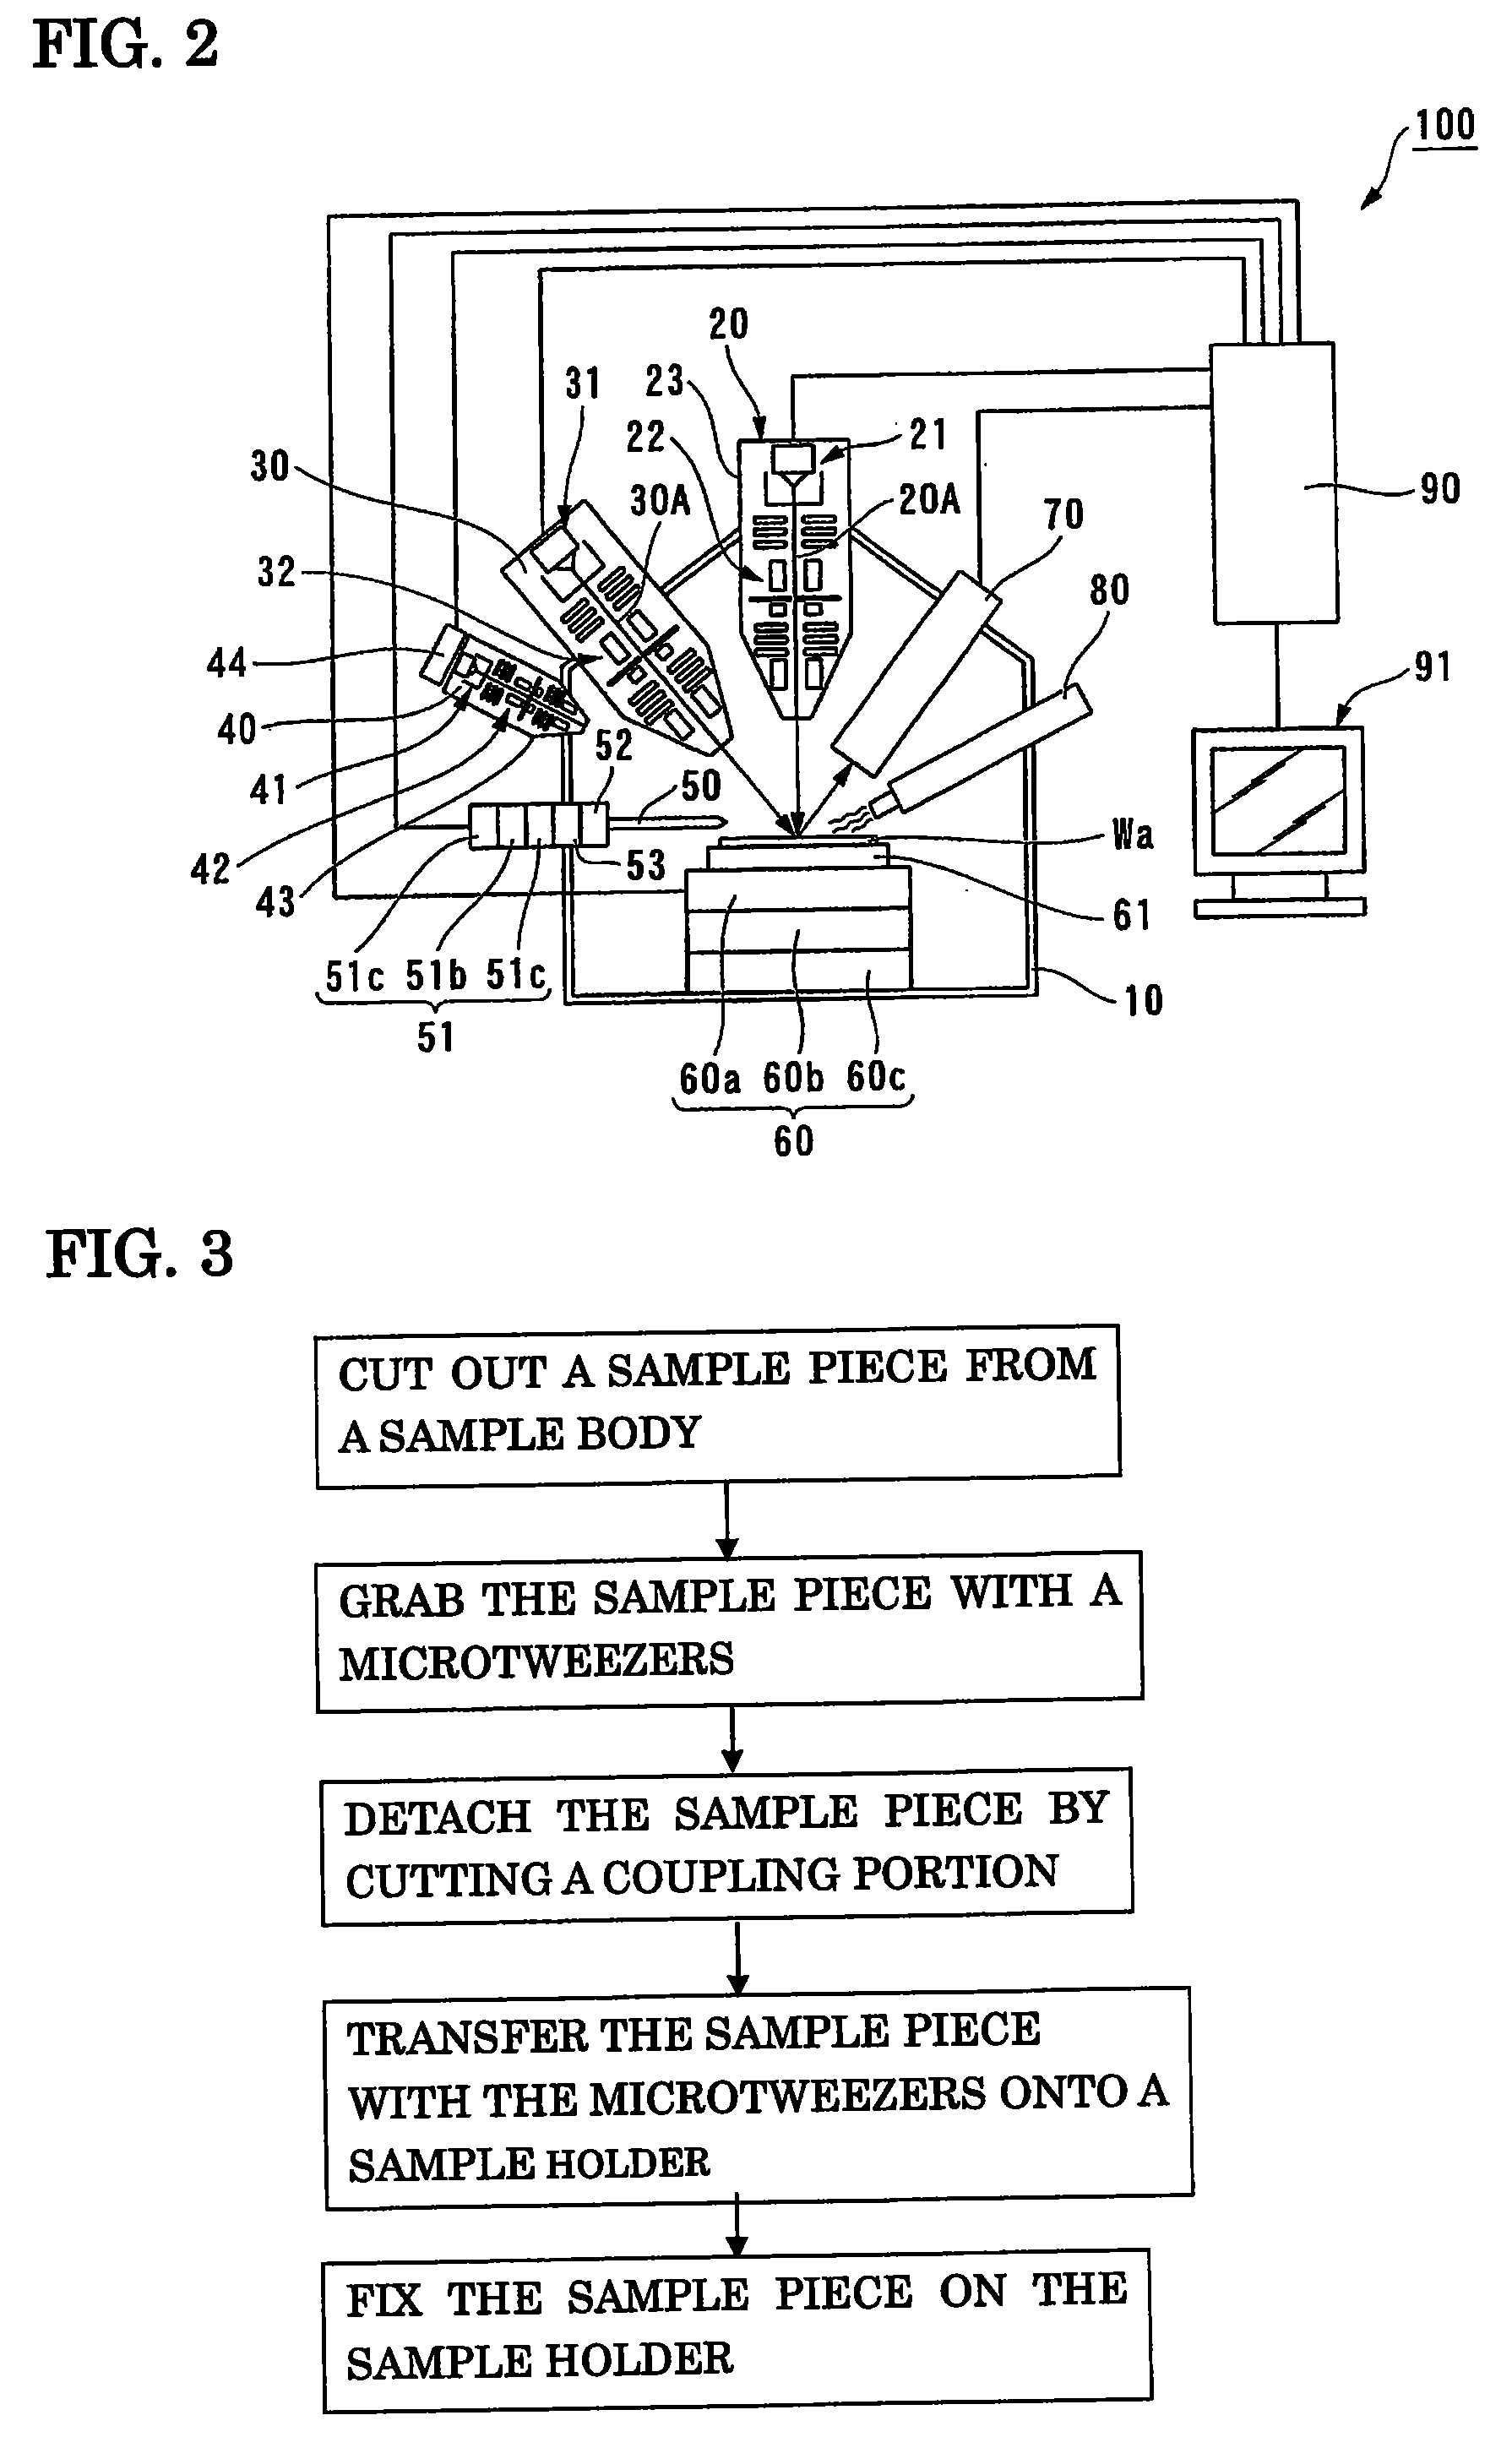 Method of preparing a transmission electron microscope sample and a sample piece for a transmission electron microscope